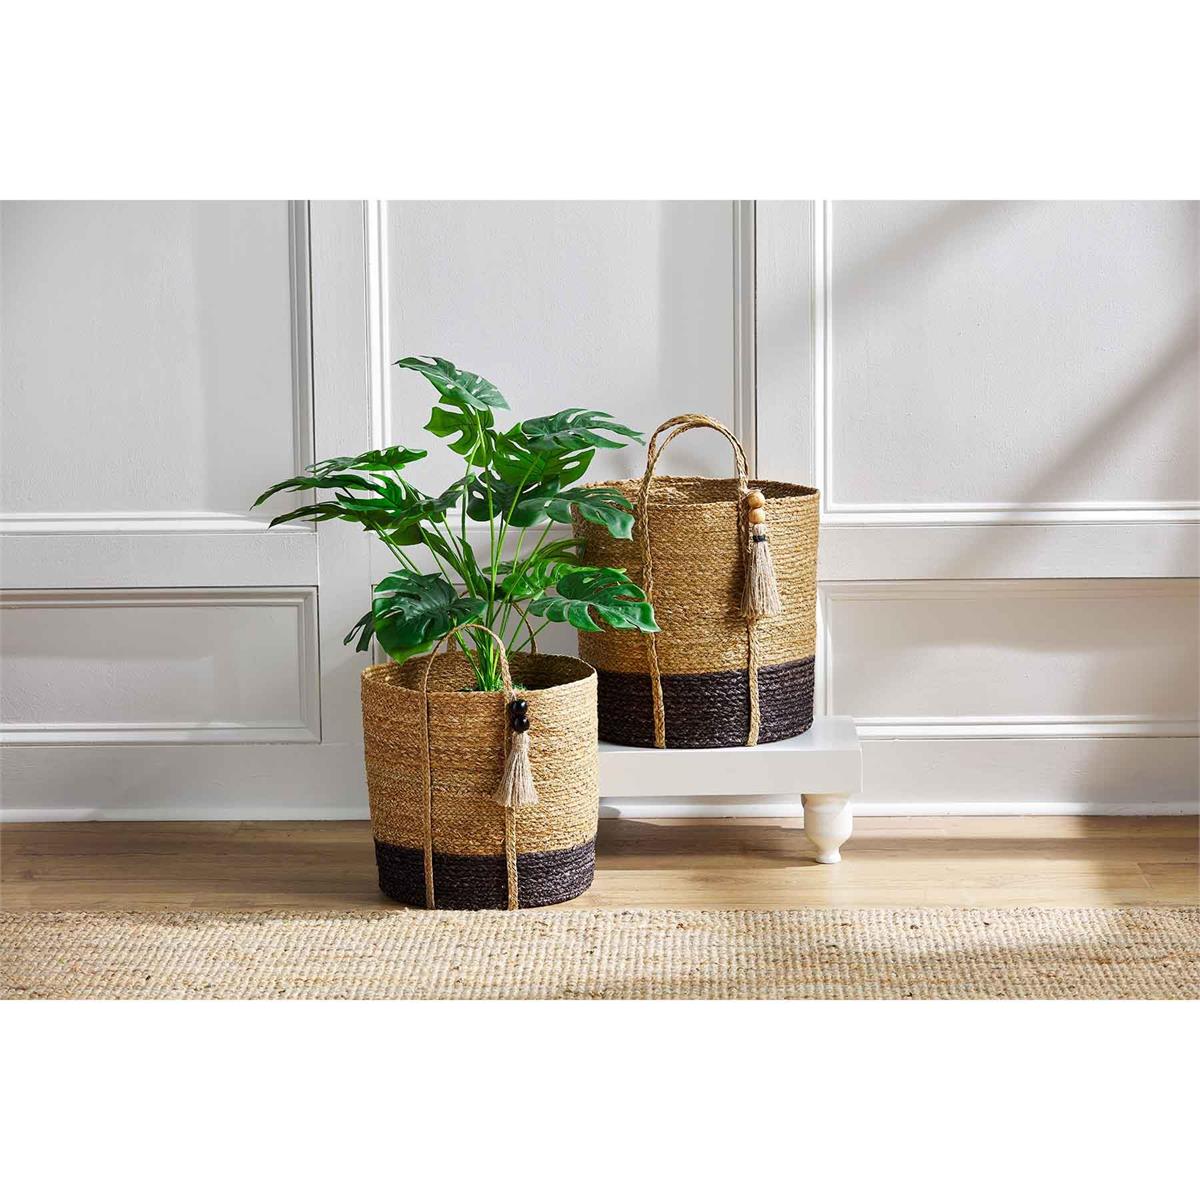 small and large two-toned seagrass baskets displayed on a square riser next to a white wall